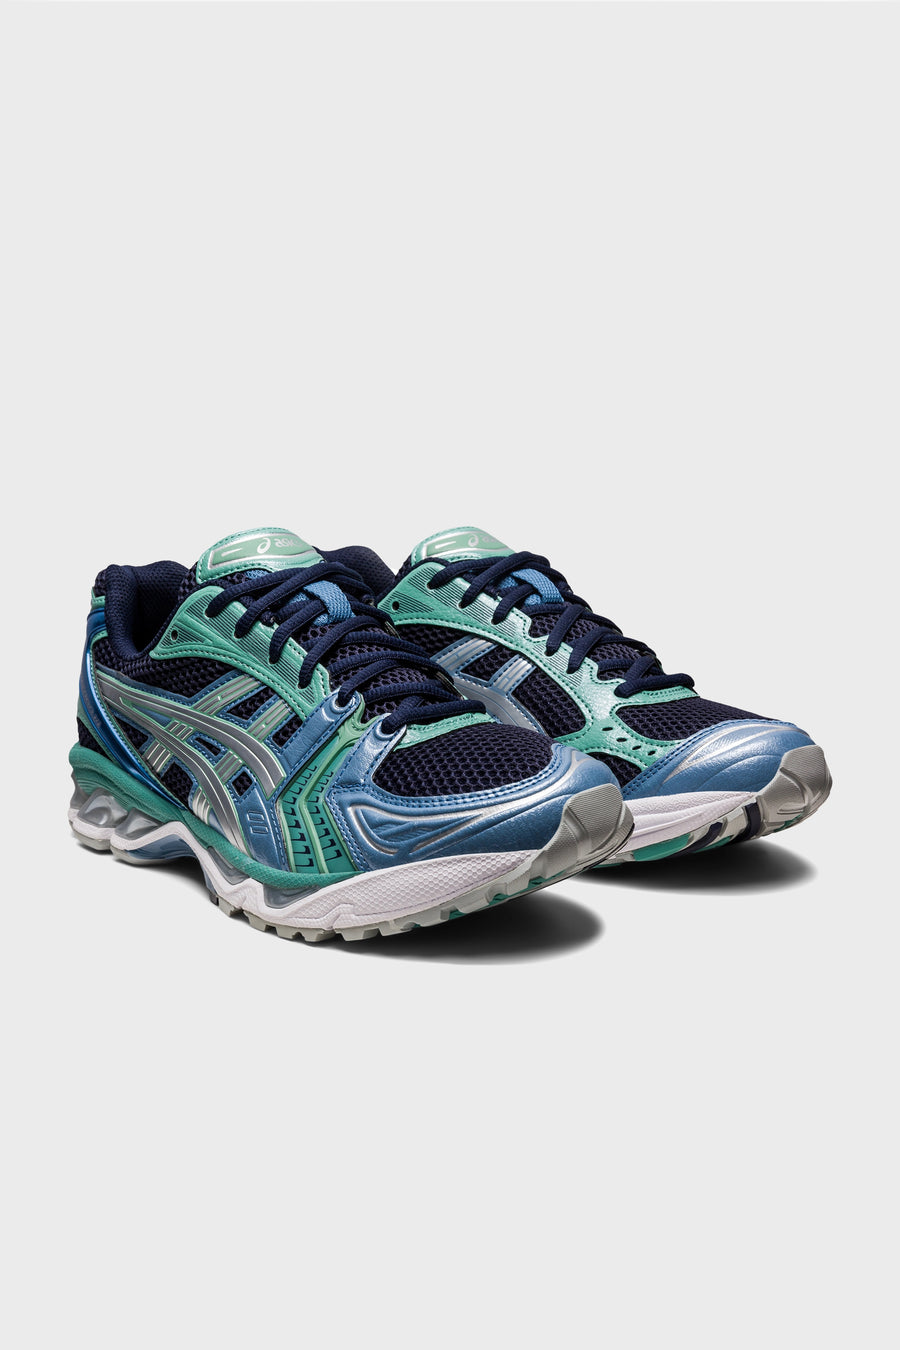 Gel-Kayano 14 Midnight/Pure Silver 1201A019-402